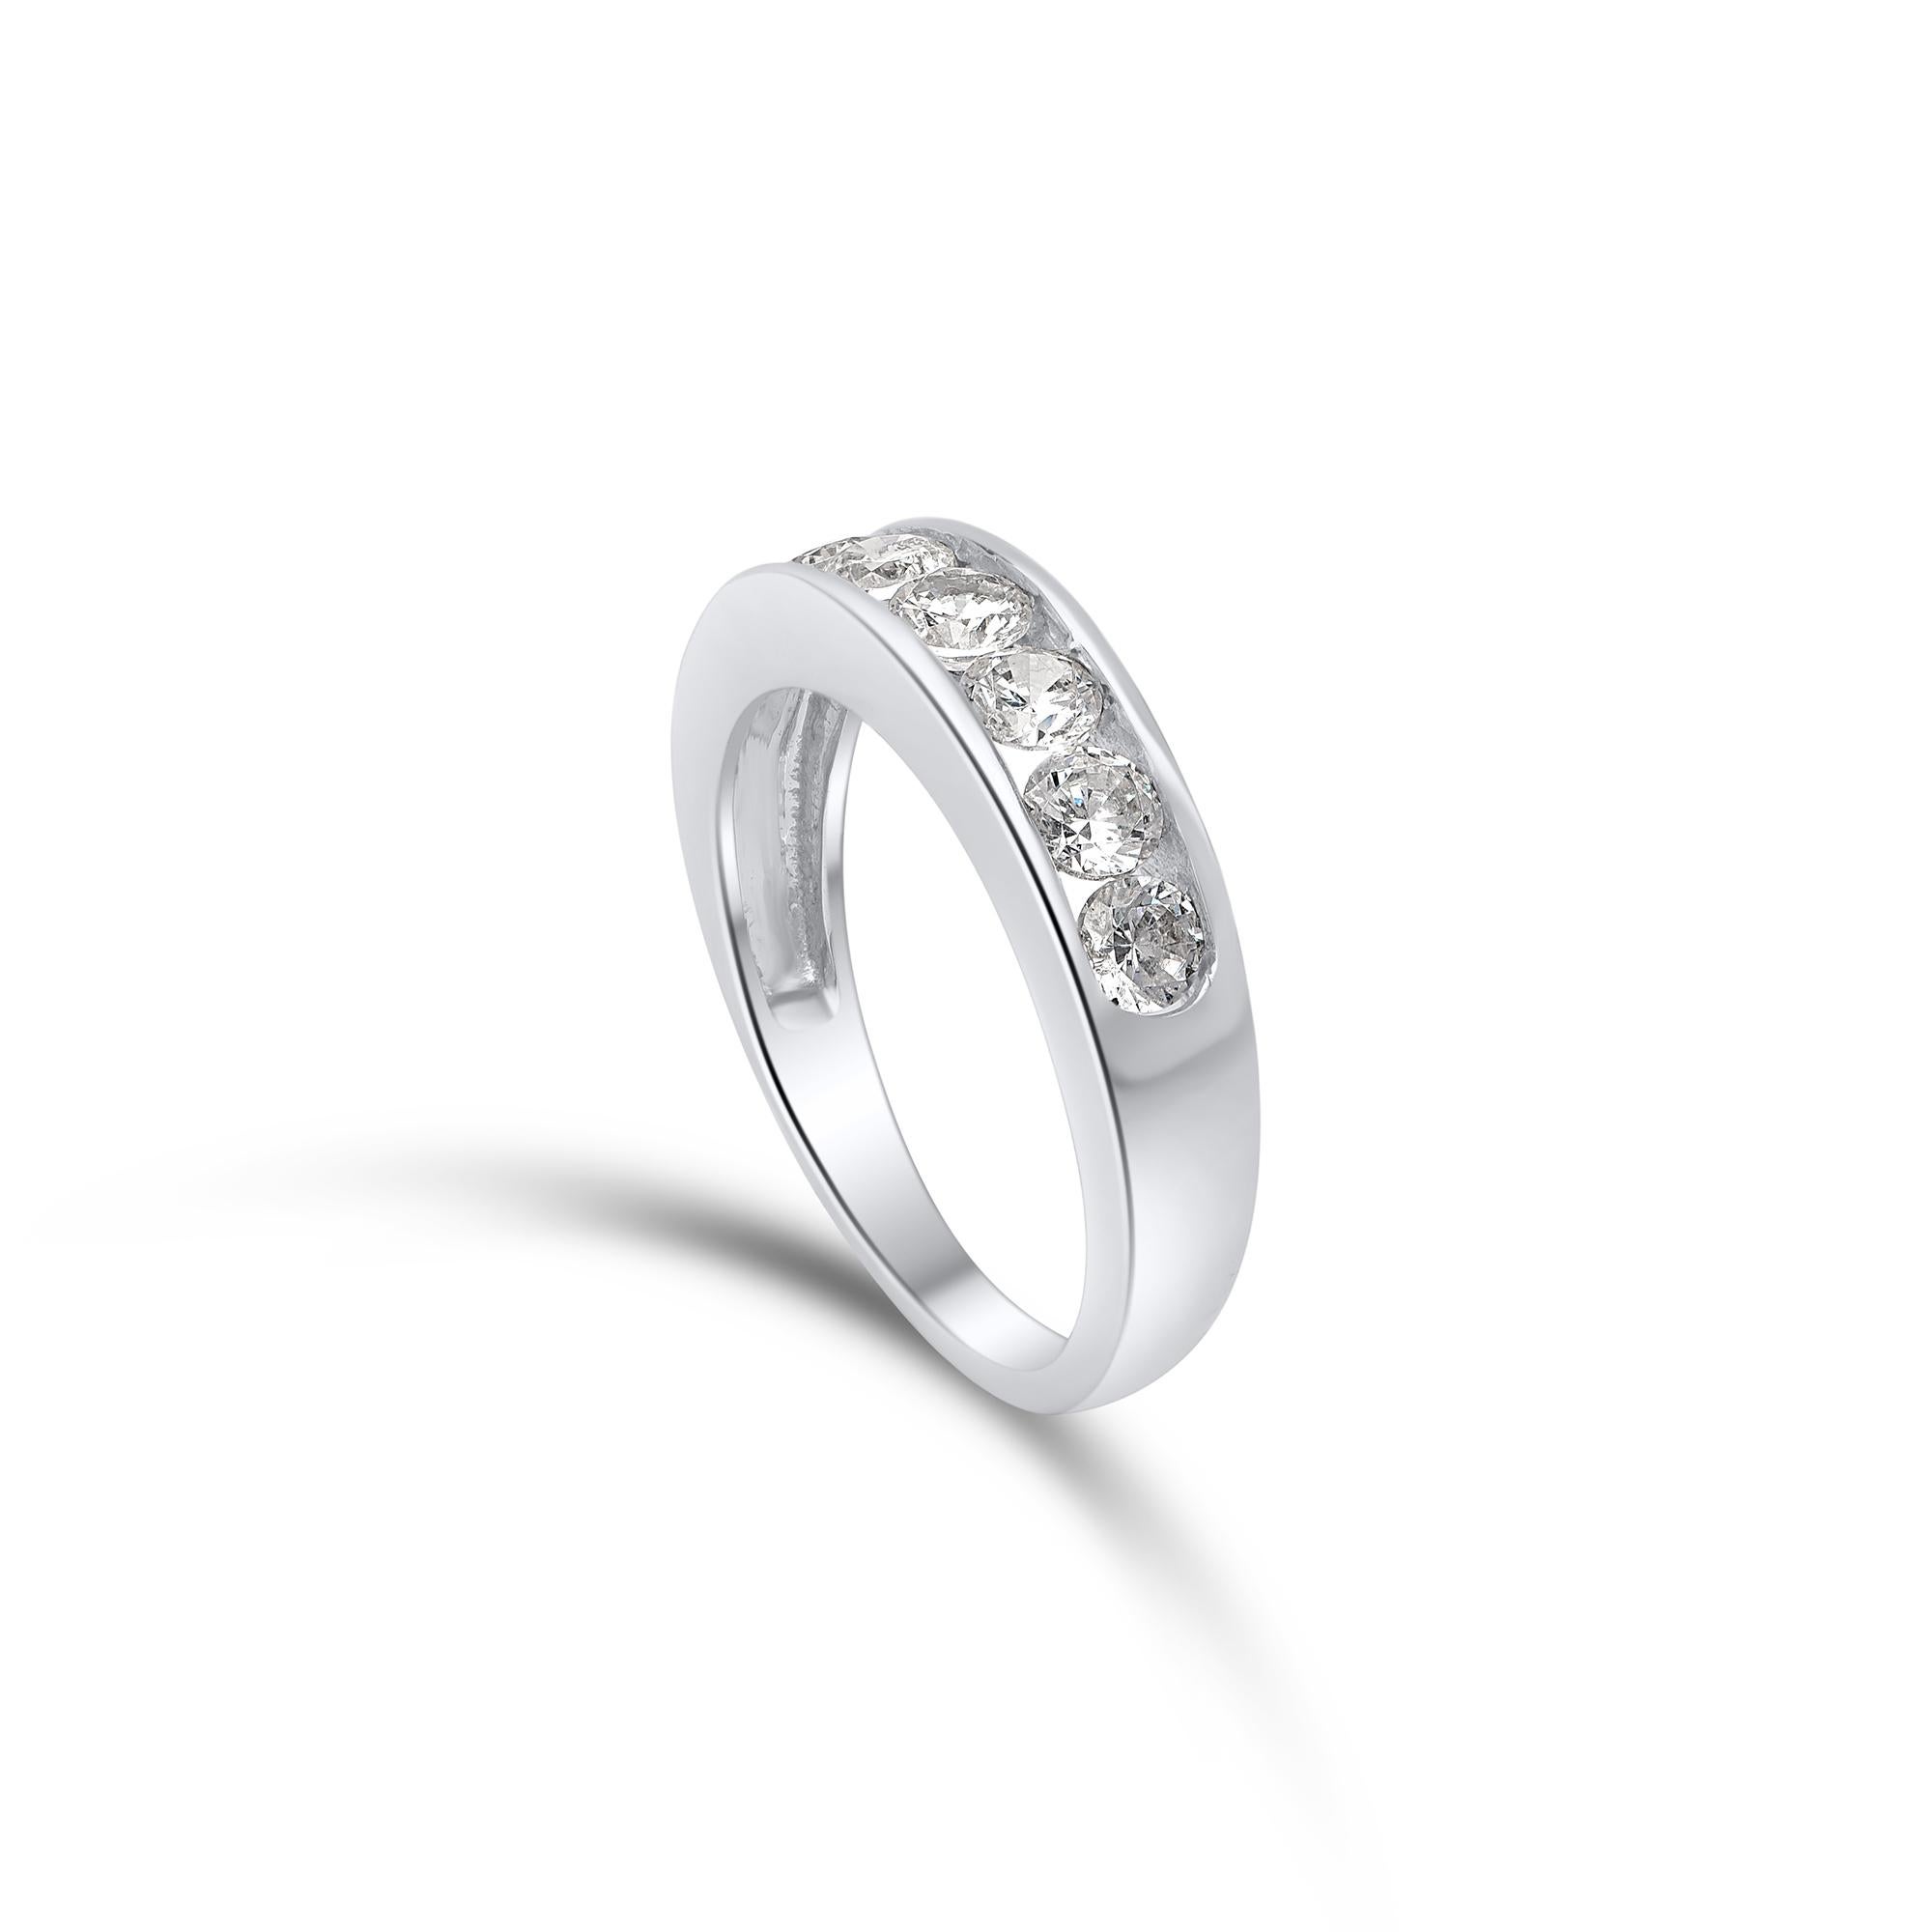 Embellished with seven brilliant-cut diamonds set beautifully in channel setting and fashioned in 18 kt white gold. Diamonds are graded H-I Color, I2 Clarity. 

Metal color and ring size can be customized on request. 

This piece is made to order.